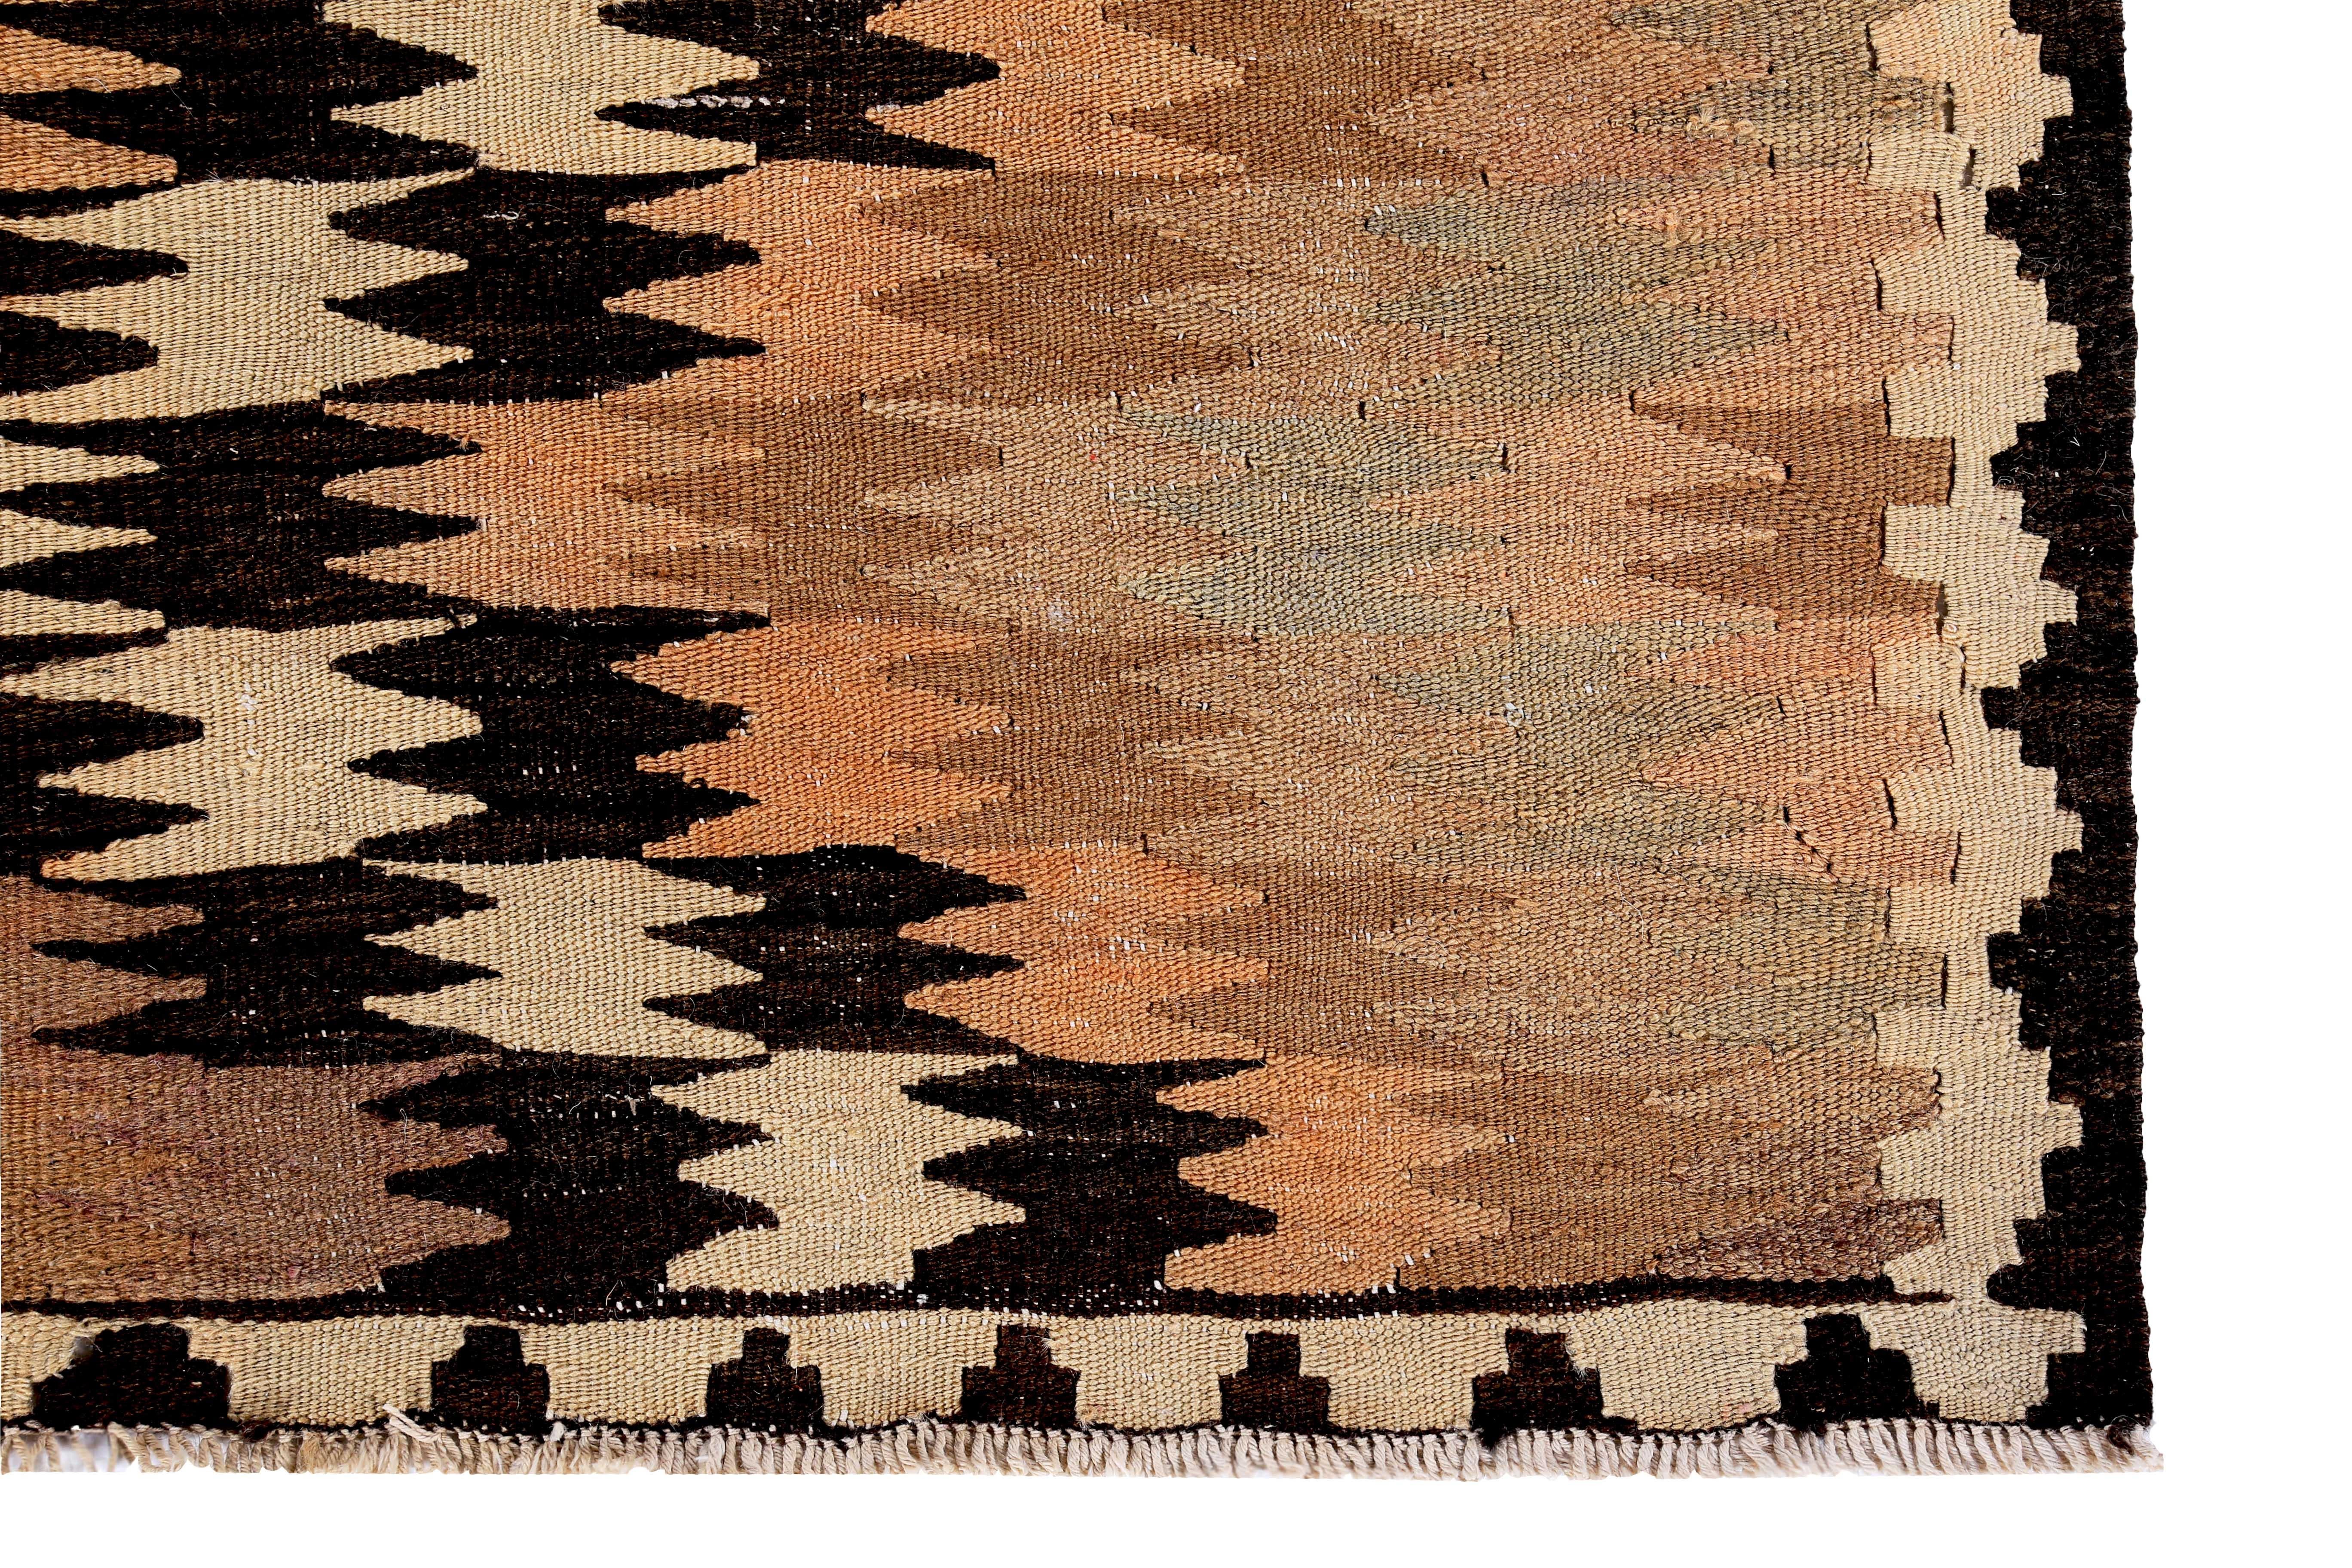 Hand-Woven Turkish Kilim Runner Rug with Pink & Brown Tribal Diamonds on Ivory Field